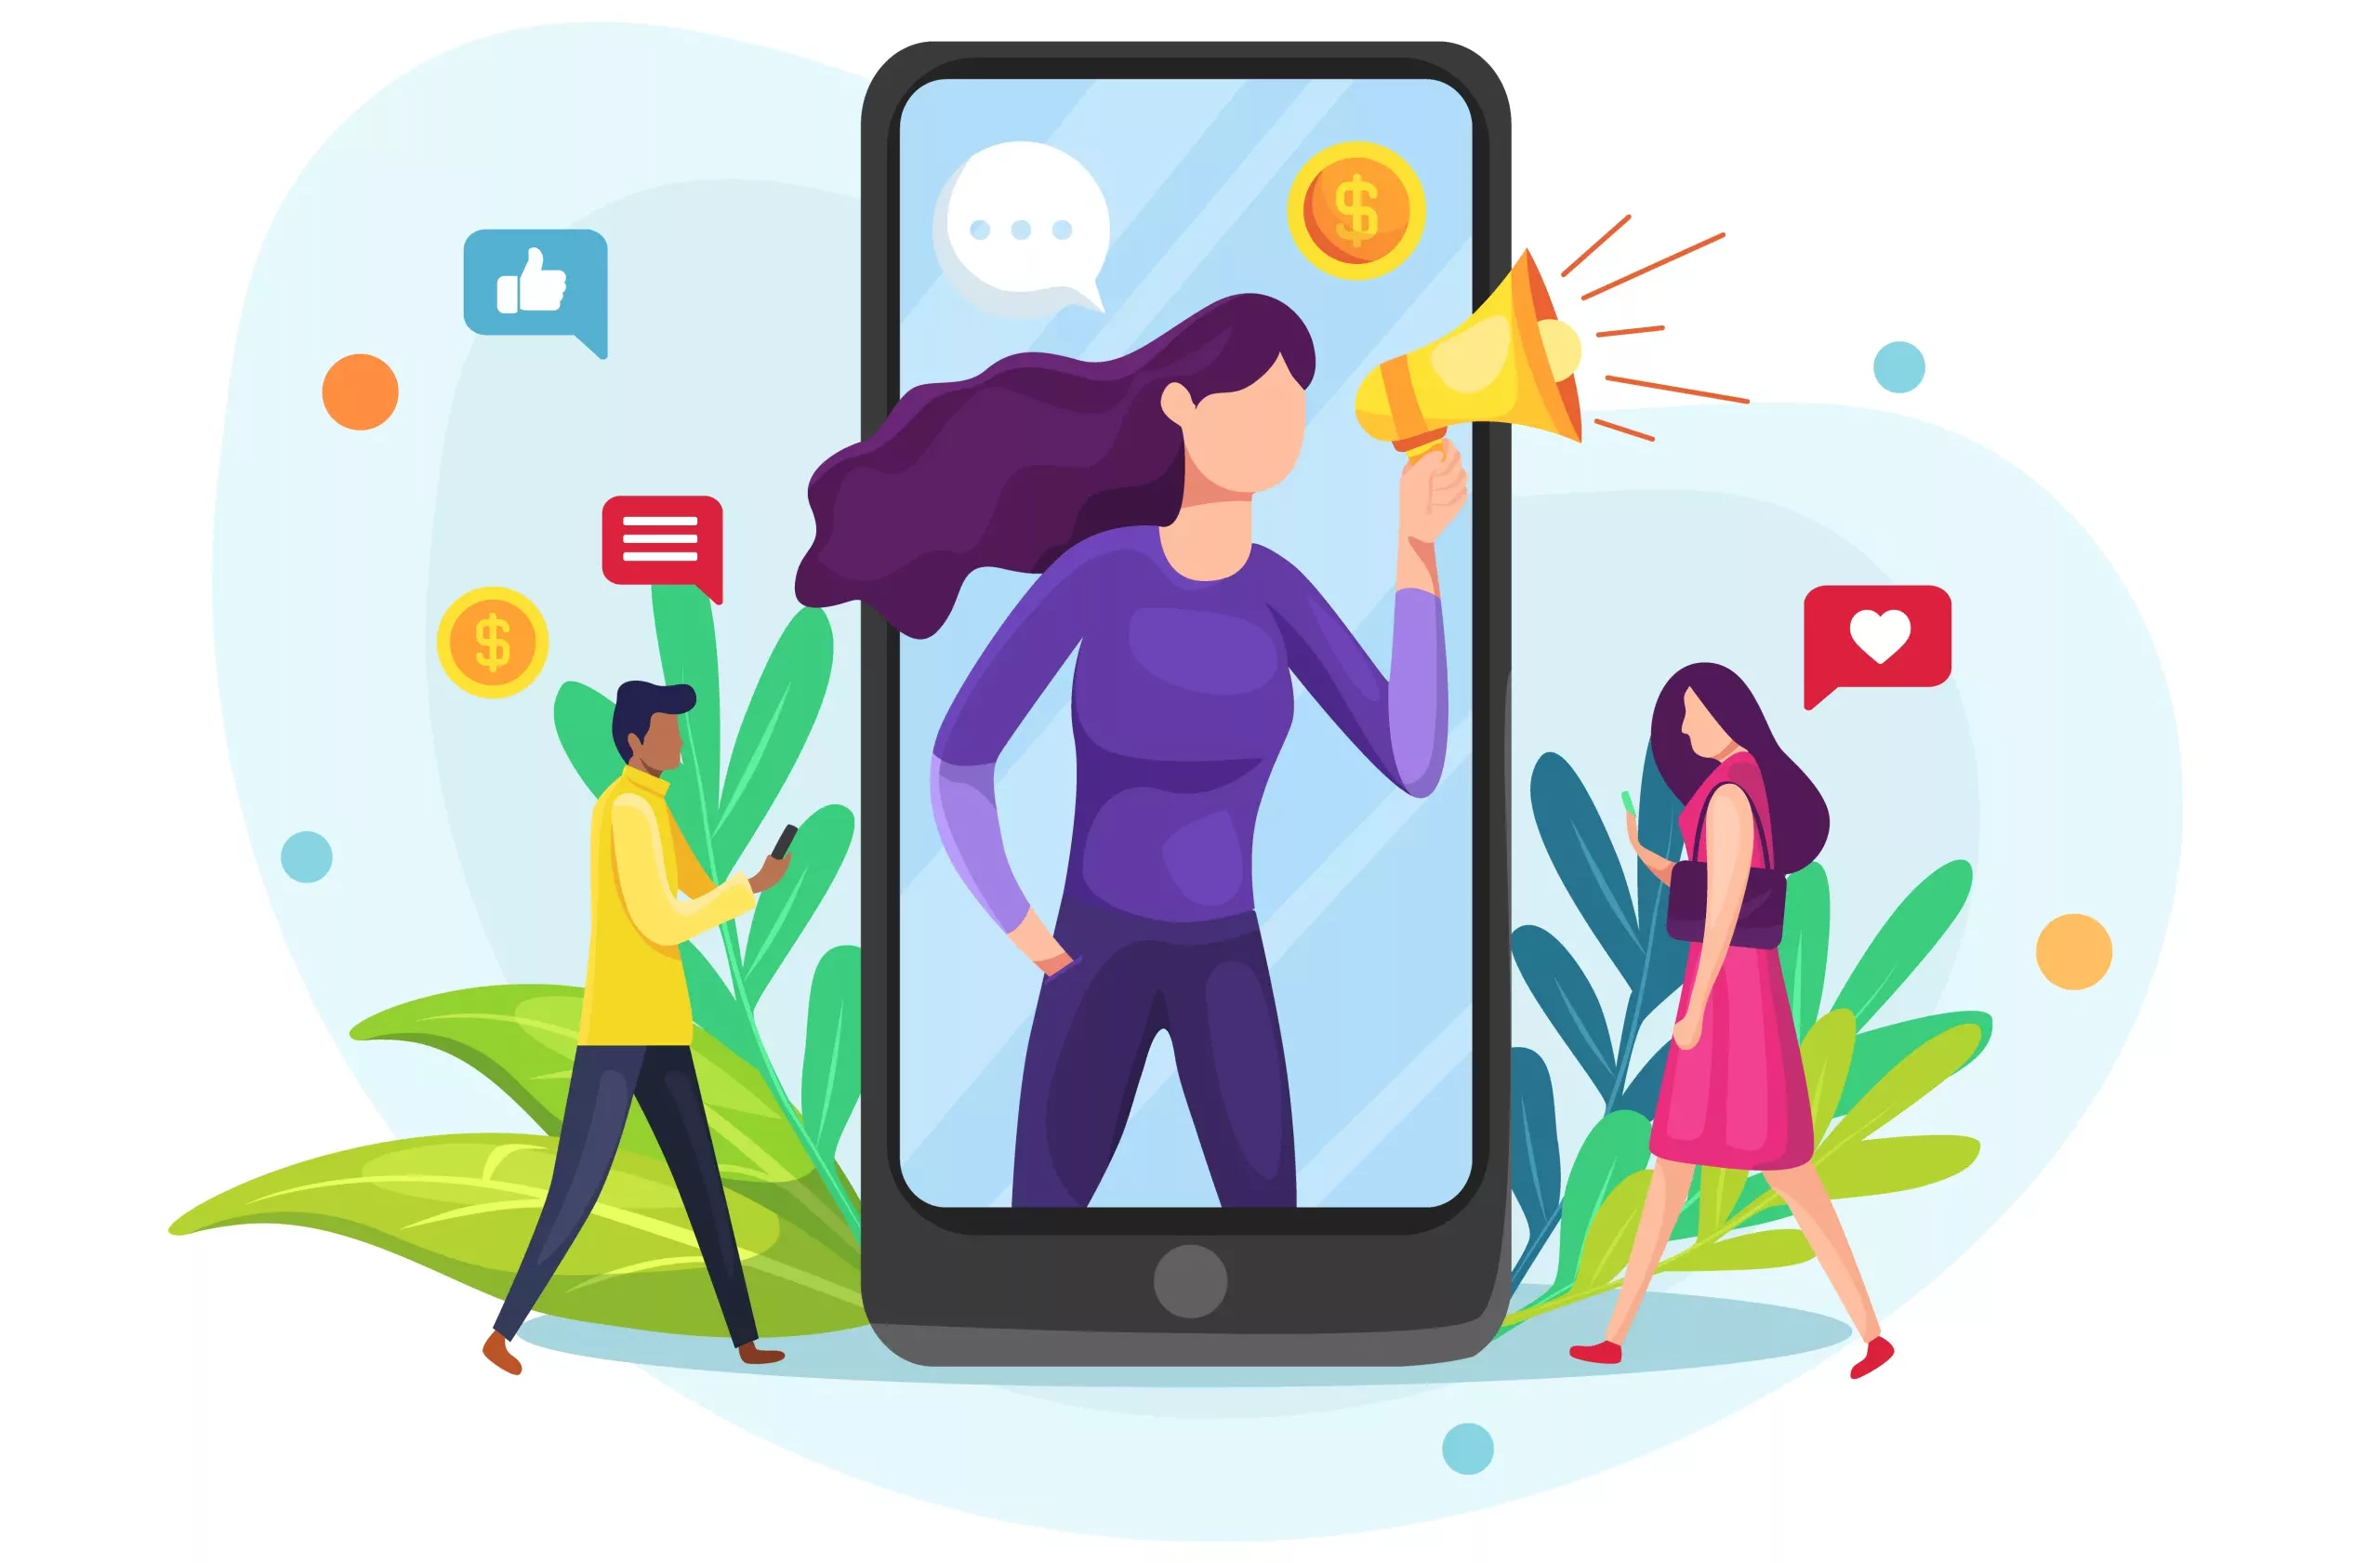 Influence or blogger. Mobile phone, woman with megaphone on screen and young people surrounding her. Influencer, social media or network promotion